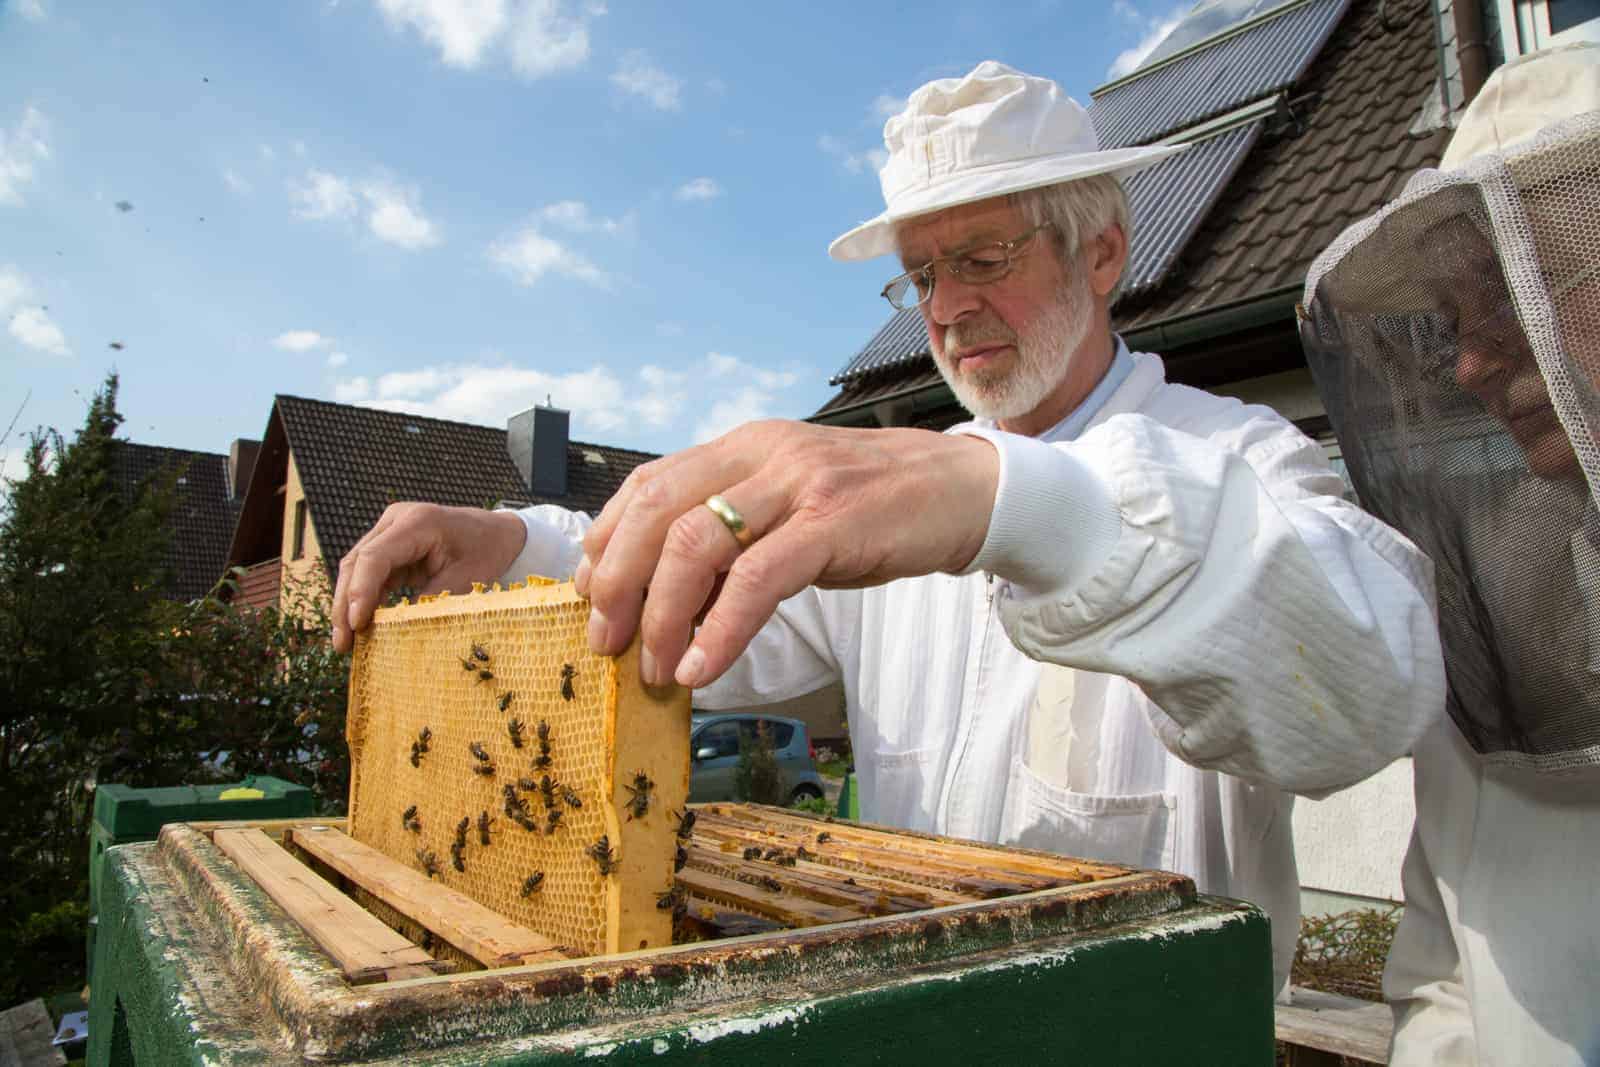 Beekeeping Suit or Jacket: Which is Better?